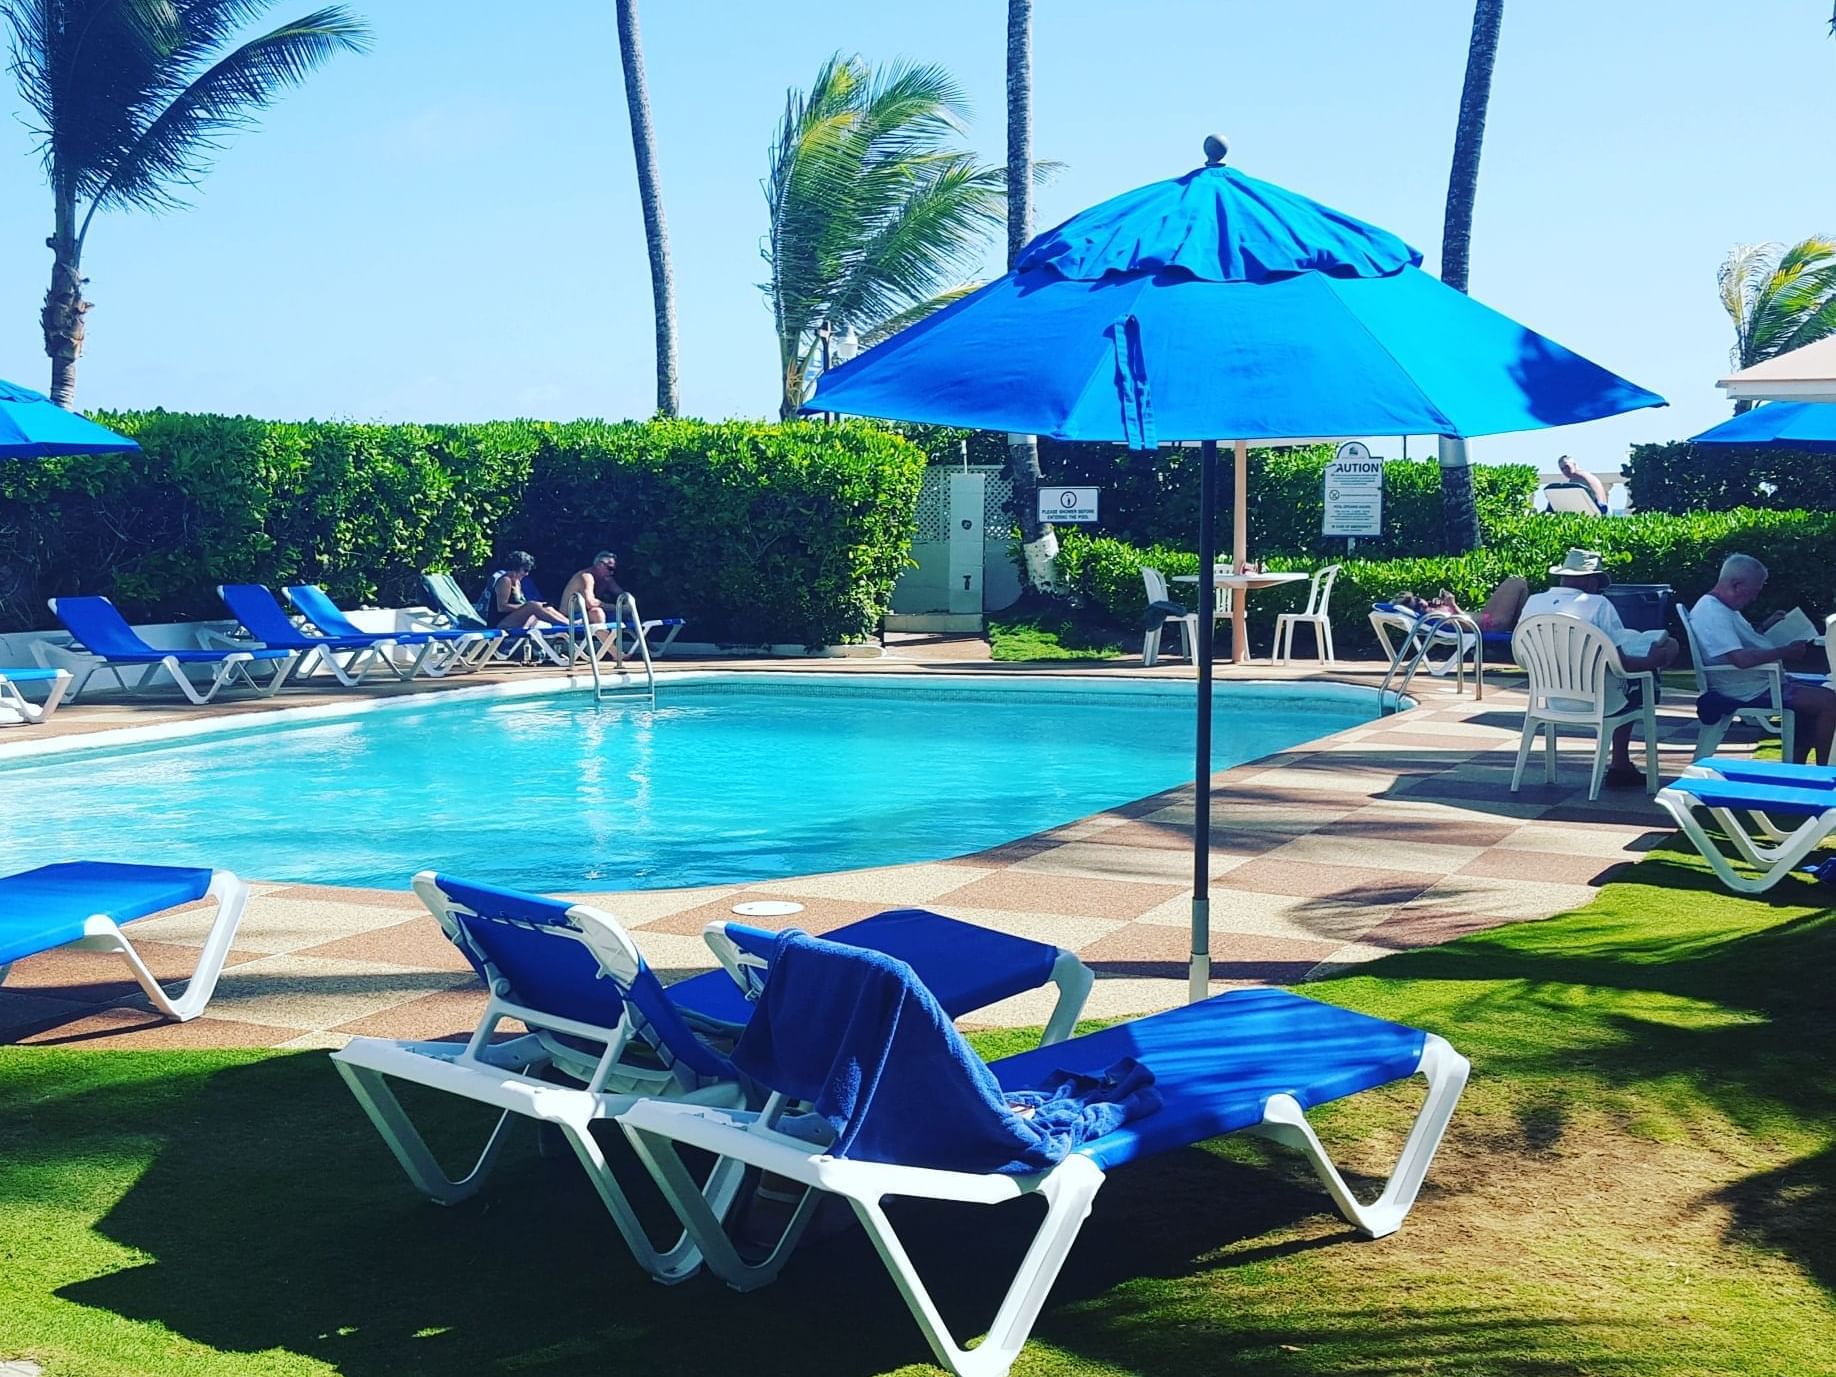 Sunbeds & palm trees by the outdoor pool area at Dover Beach Hotel